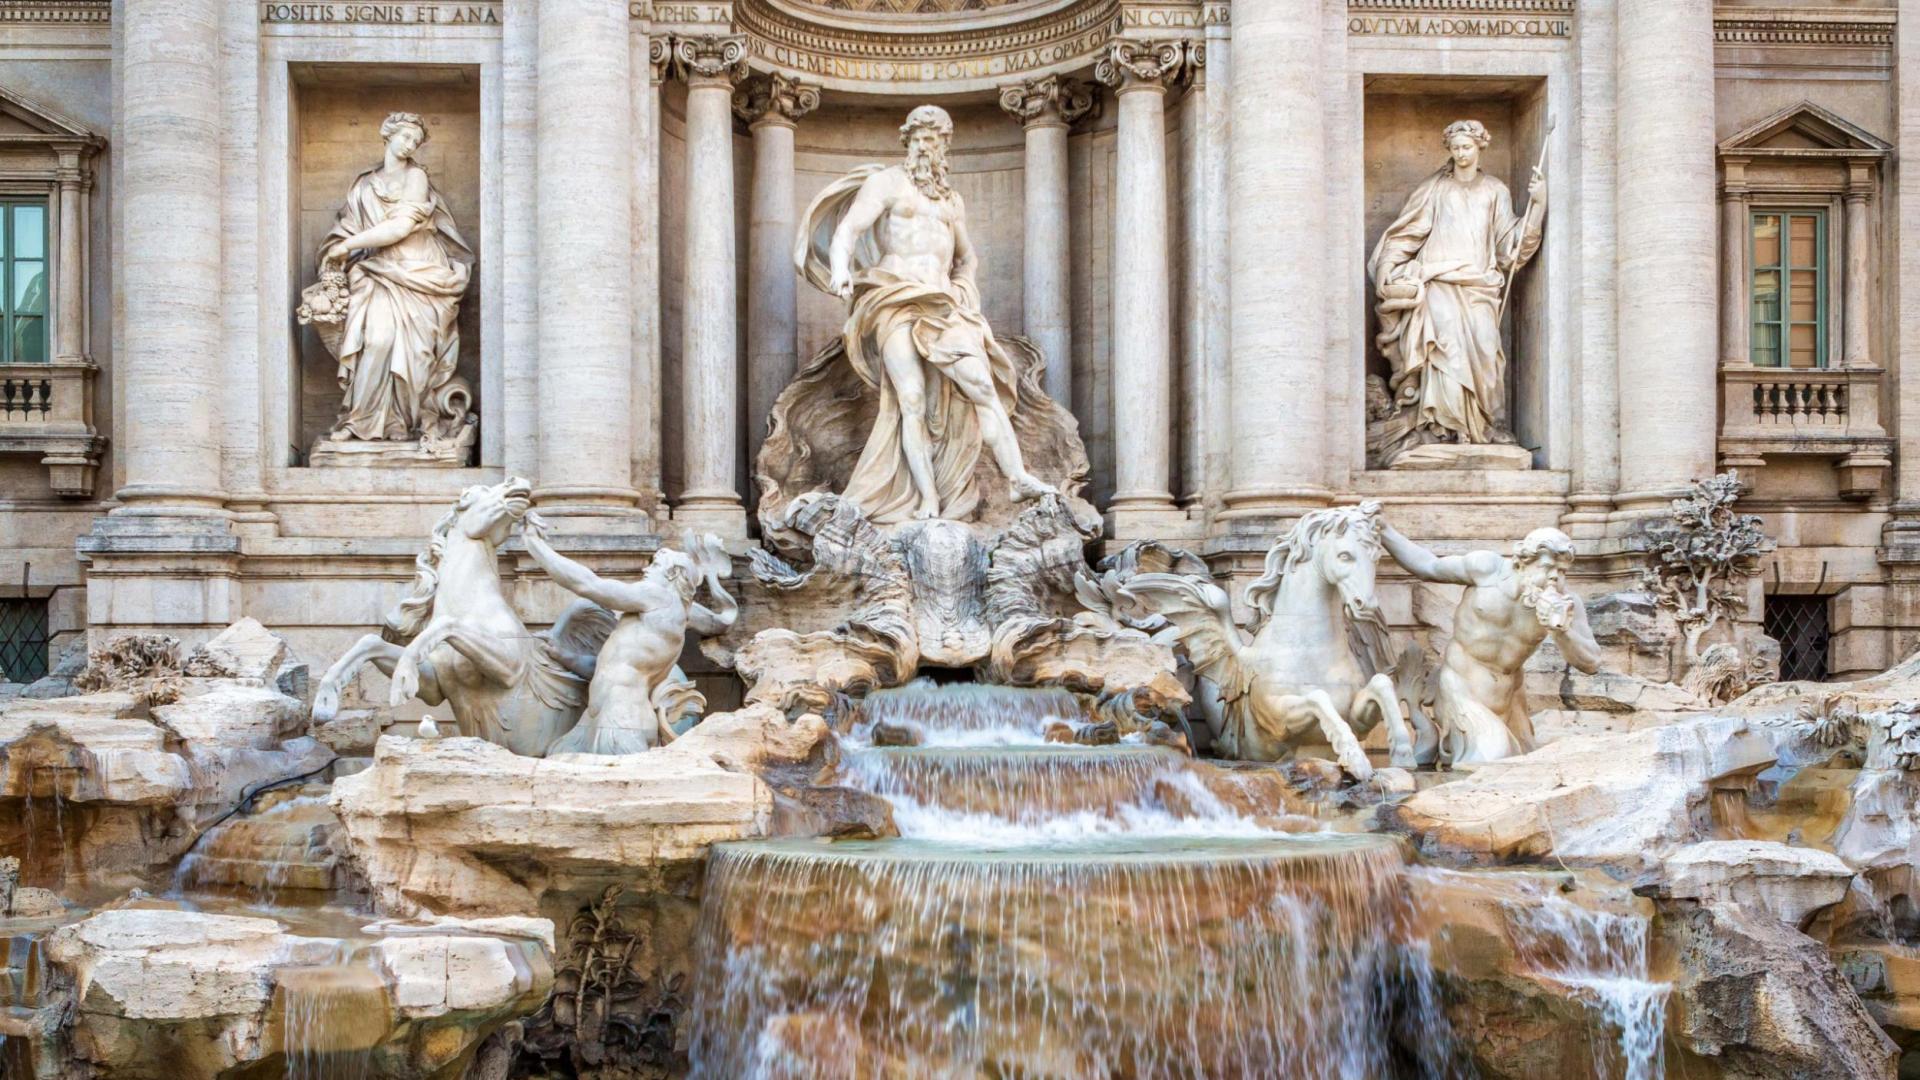 The Trevi Fountain in Rome, adorned with majestic sculptures and cascading water.